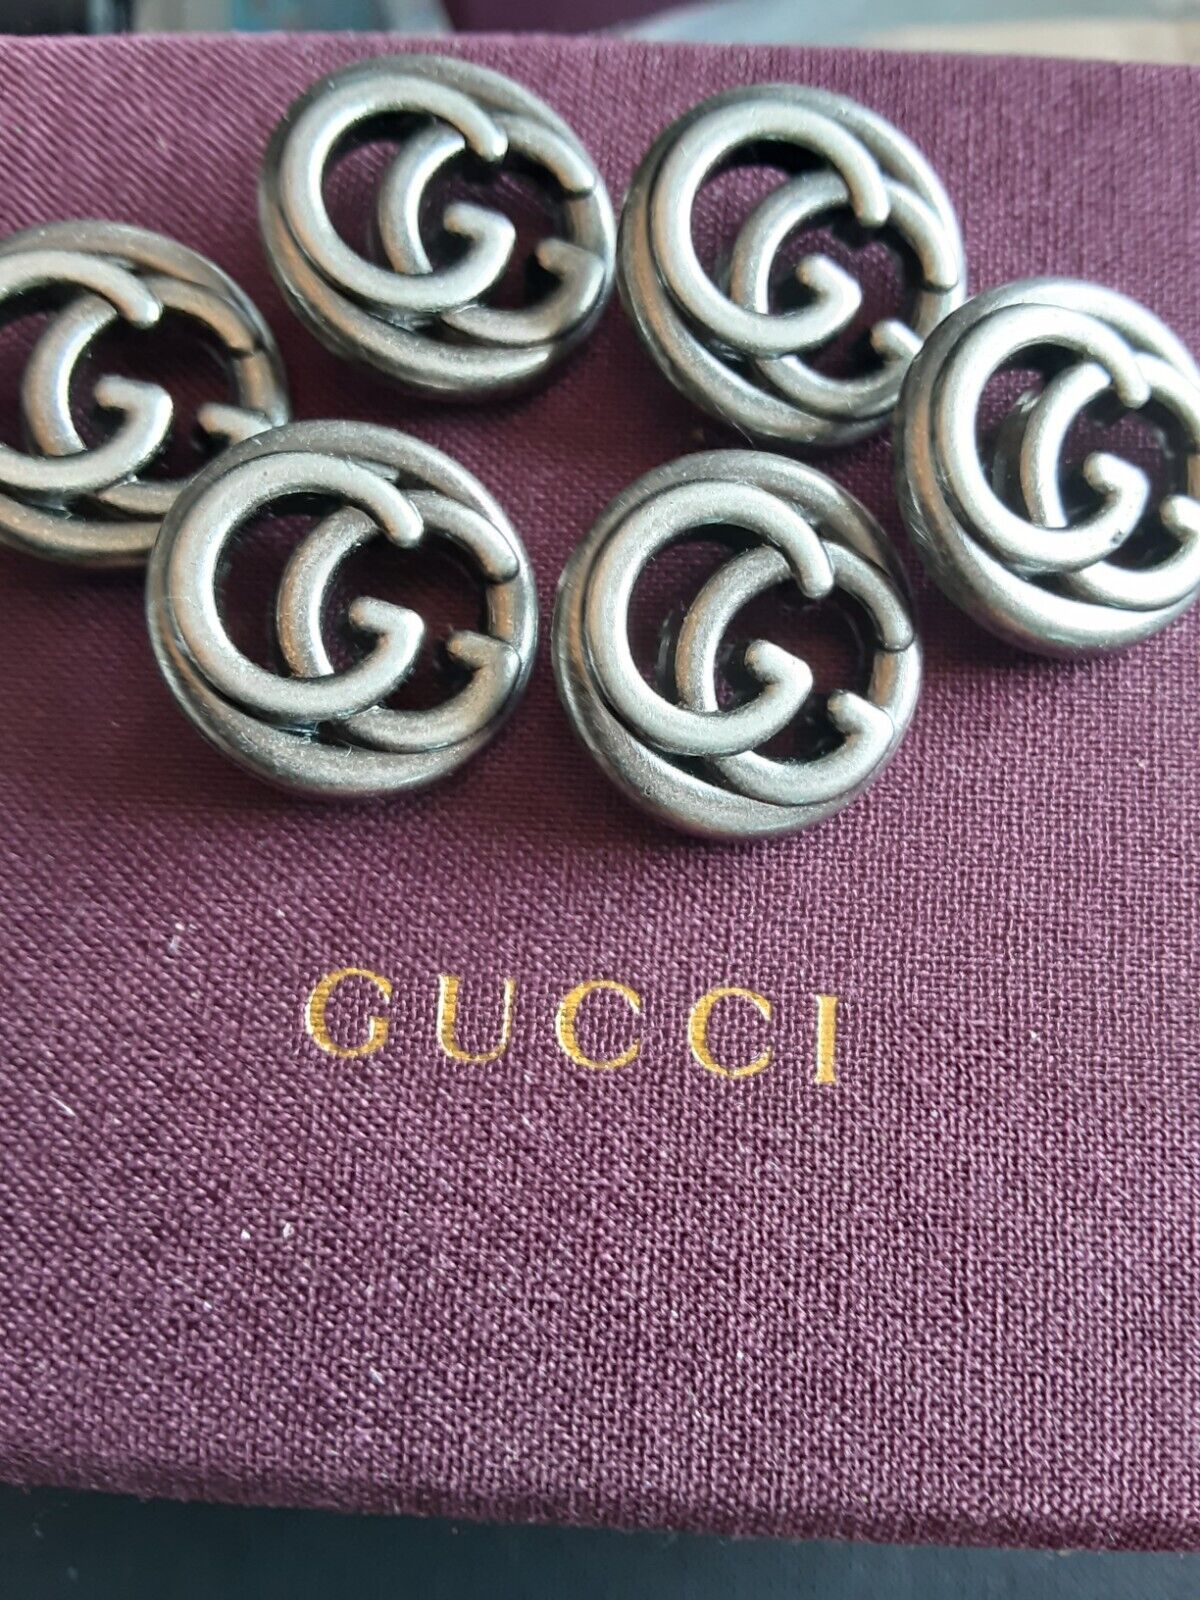 Six   Gucci  BUTTONS  silver  21 mm 0,8 inch GG